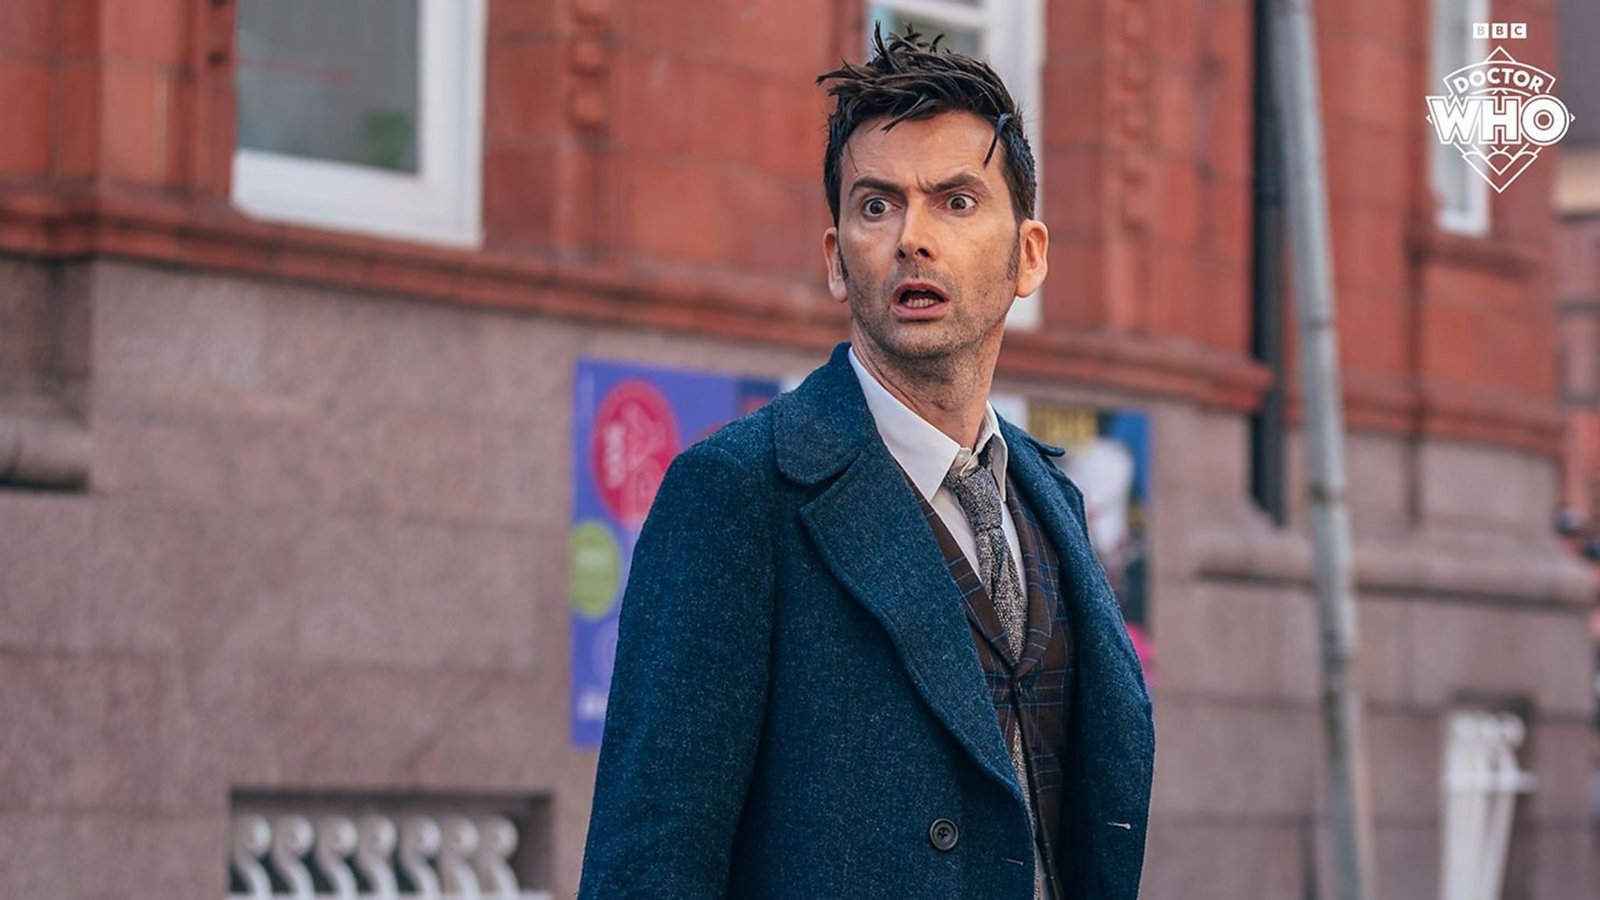 New Doctor Who 60th Anniversary Trailer Reveals Episode Titles, But What Is The Giggle?